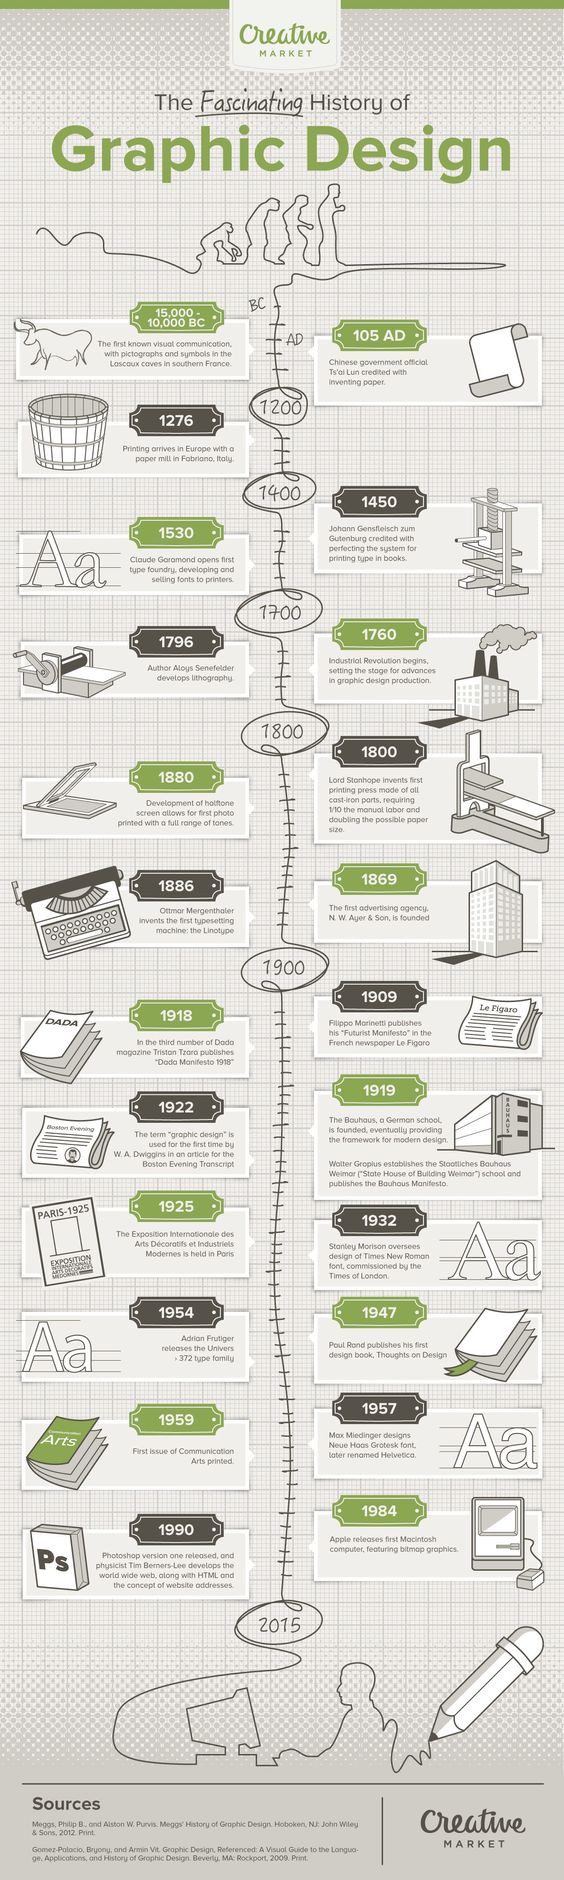 ⚠️ 17,000 years of graphic design history in one awesome infographic!